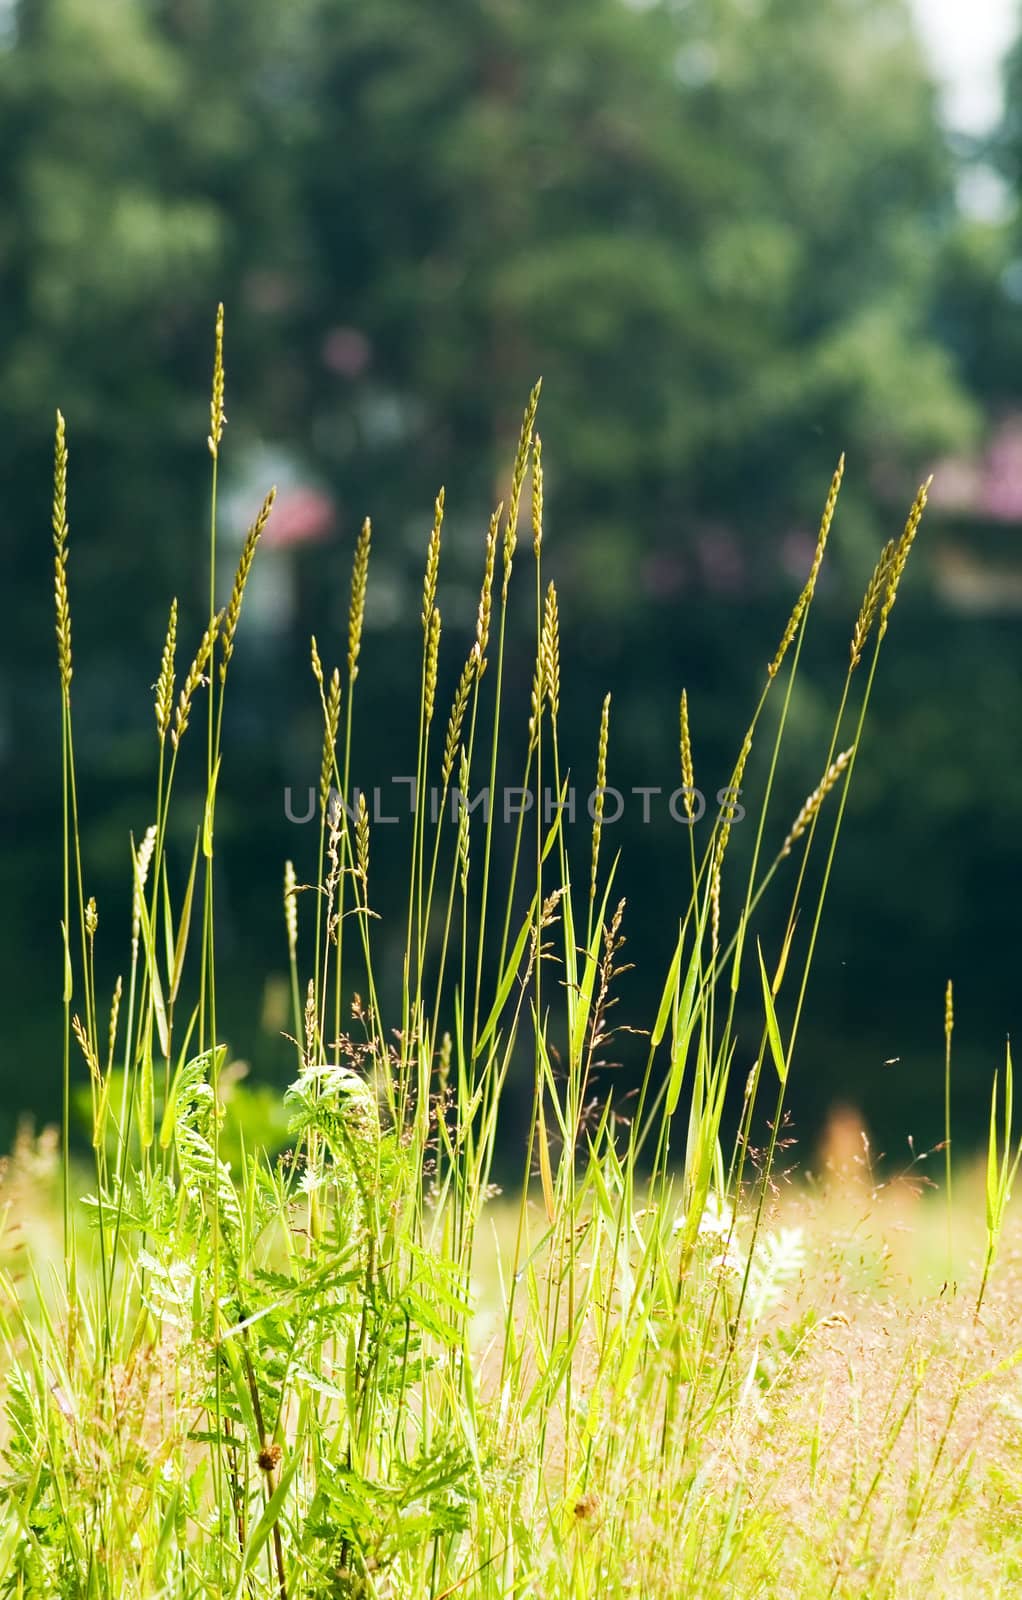 The green stalks of a grass in a field